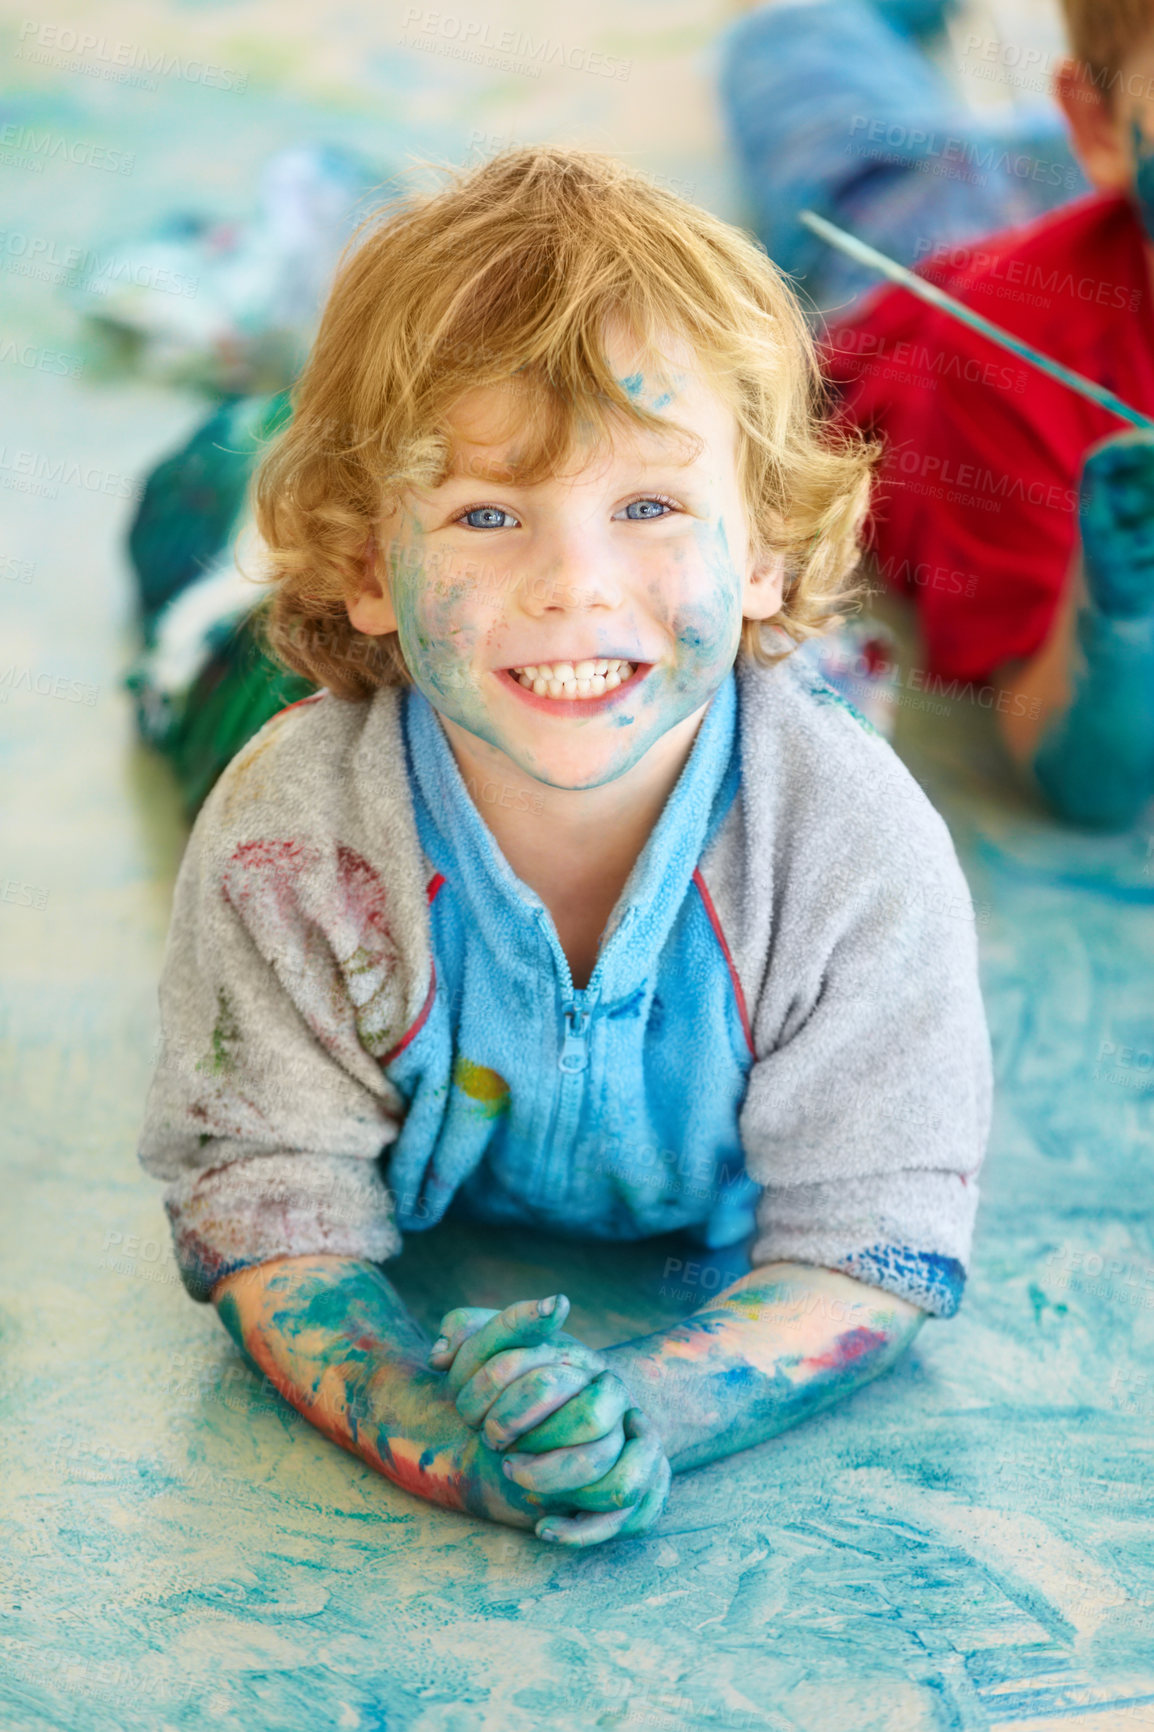 Buy stock photo Portrait, paint and a boy lying on the floor of a studio for creative expression or education at school. Art, painting and an excited young child looking happy with his messy artistic creativity